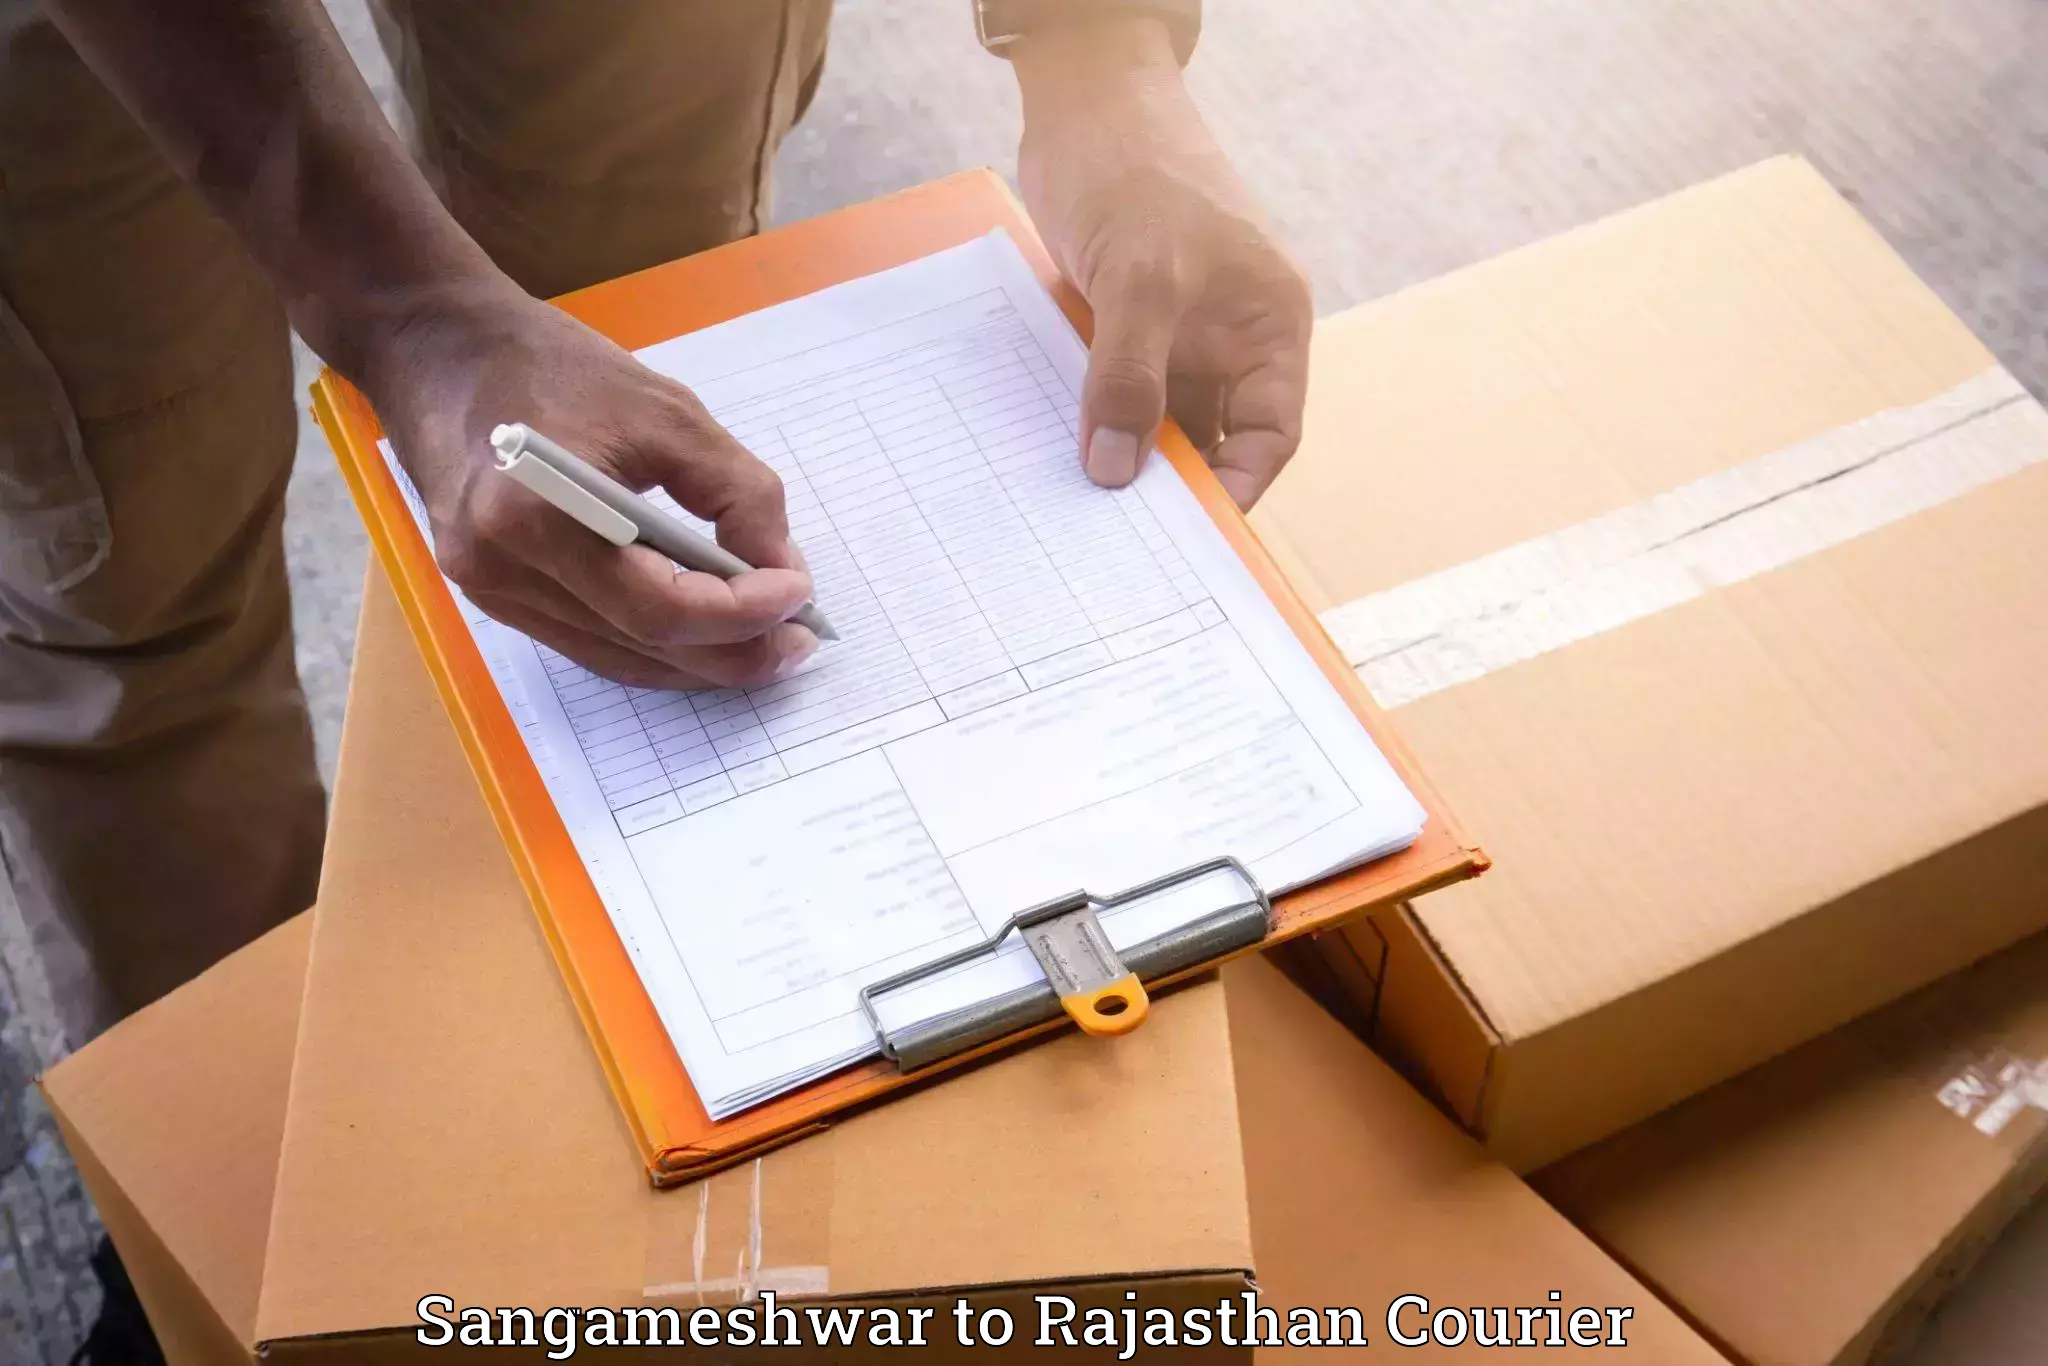 Furniture delivery service in Sangameshwar to Sidhmukh